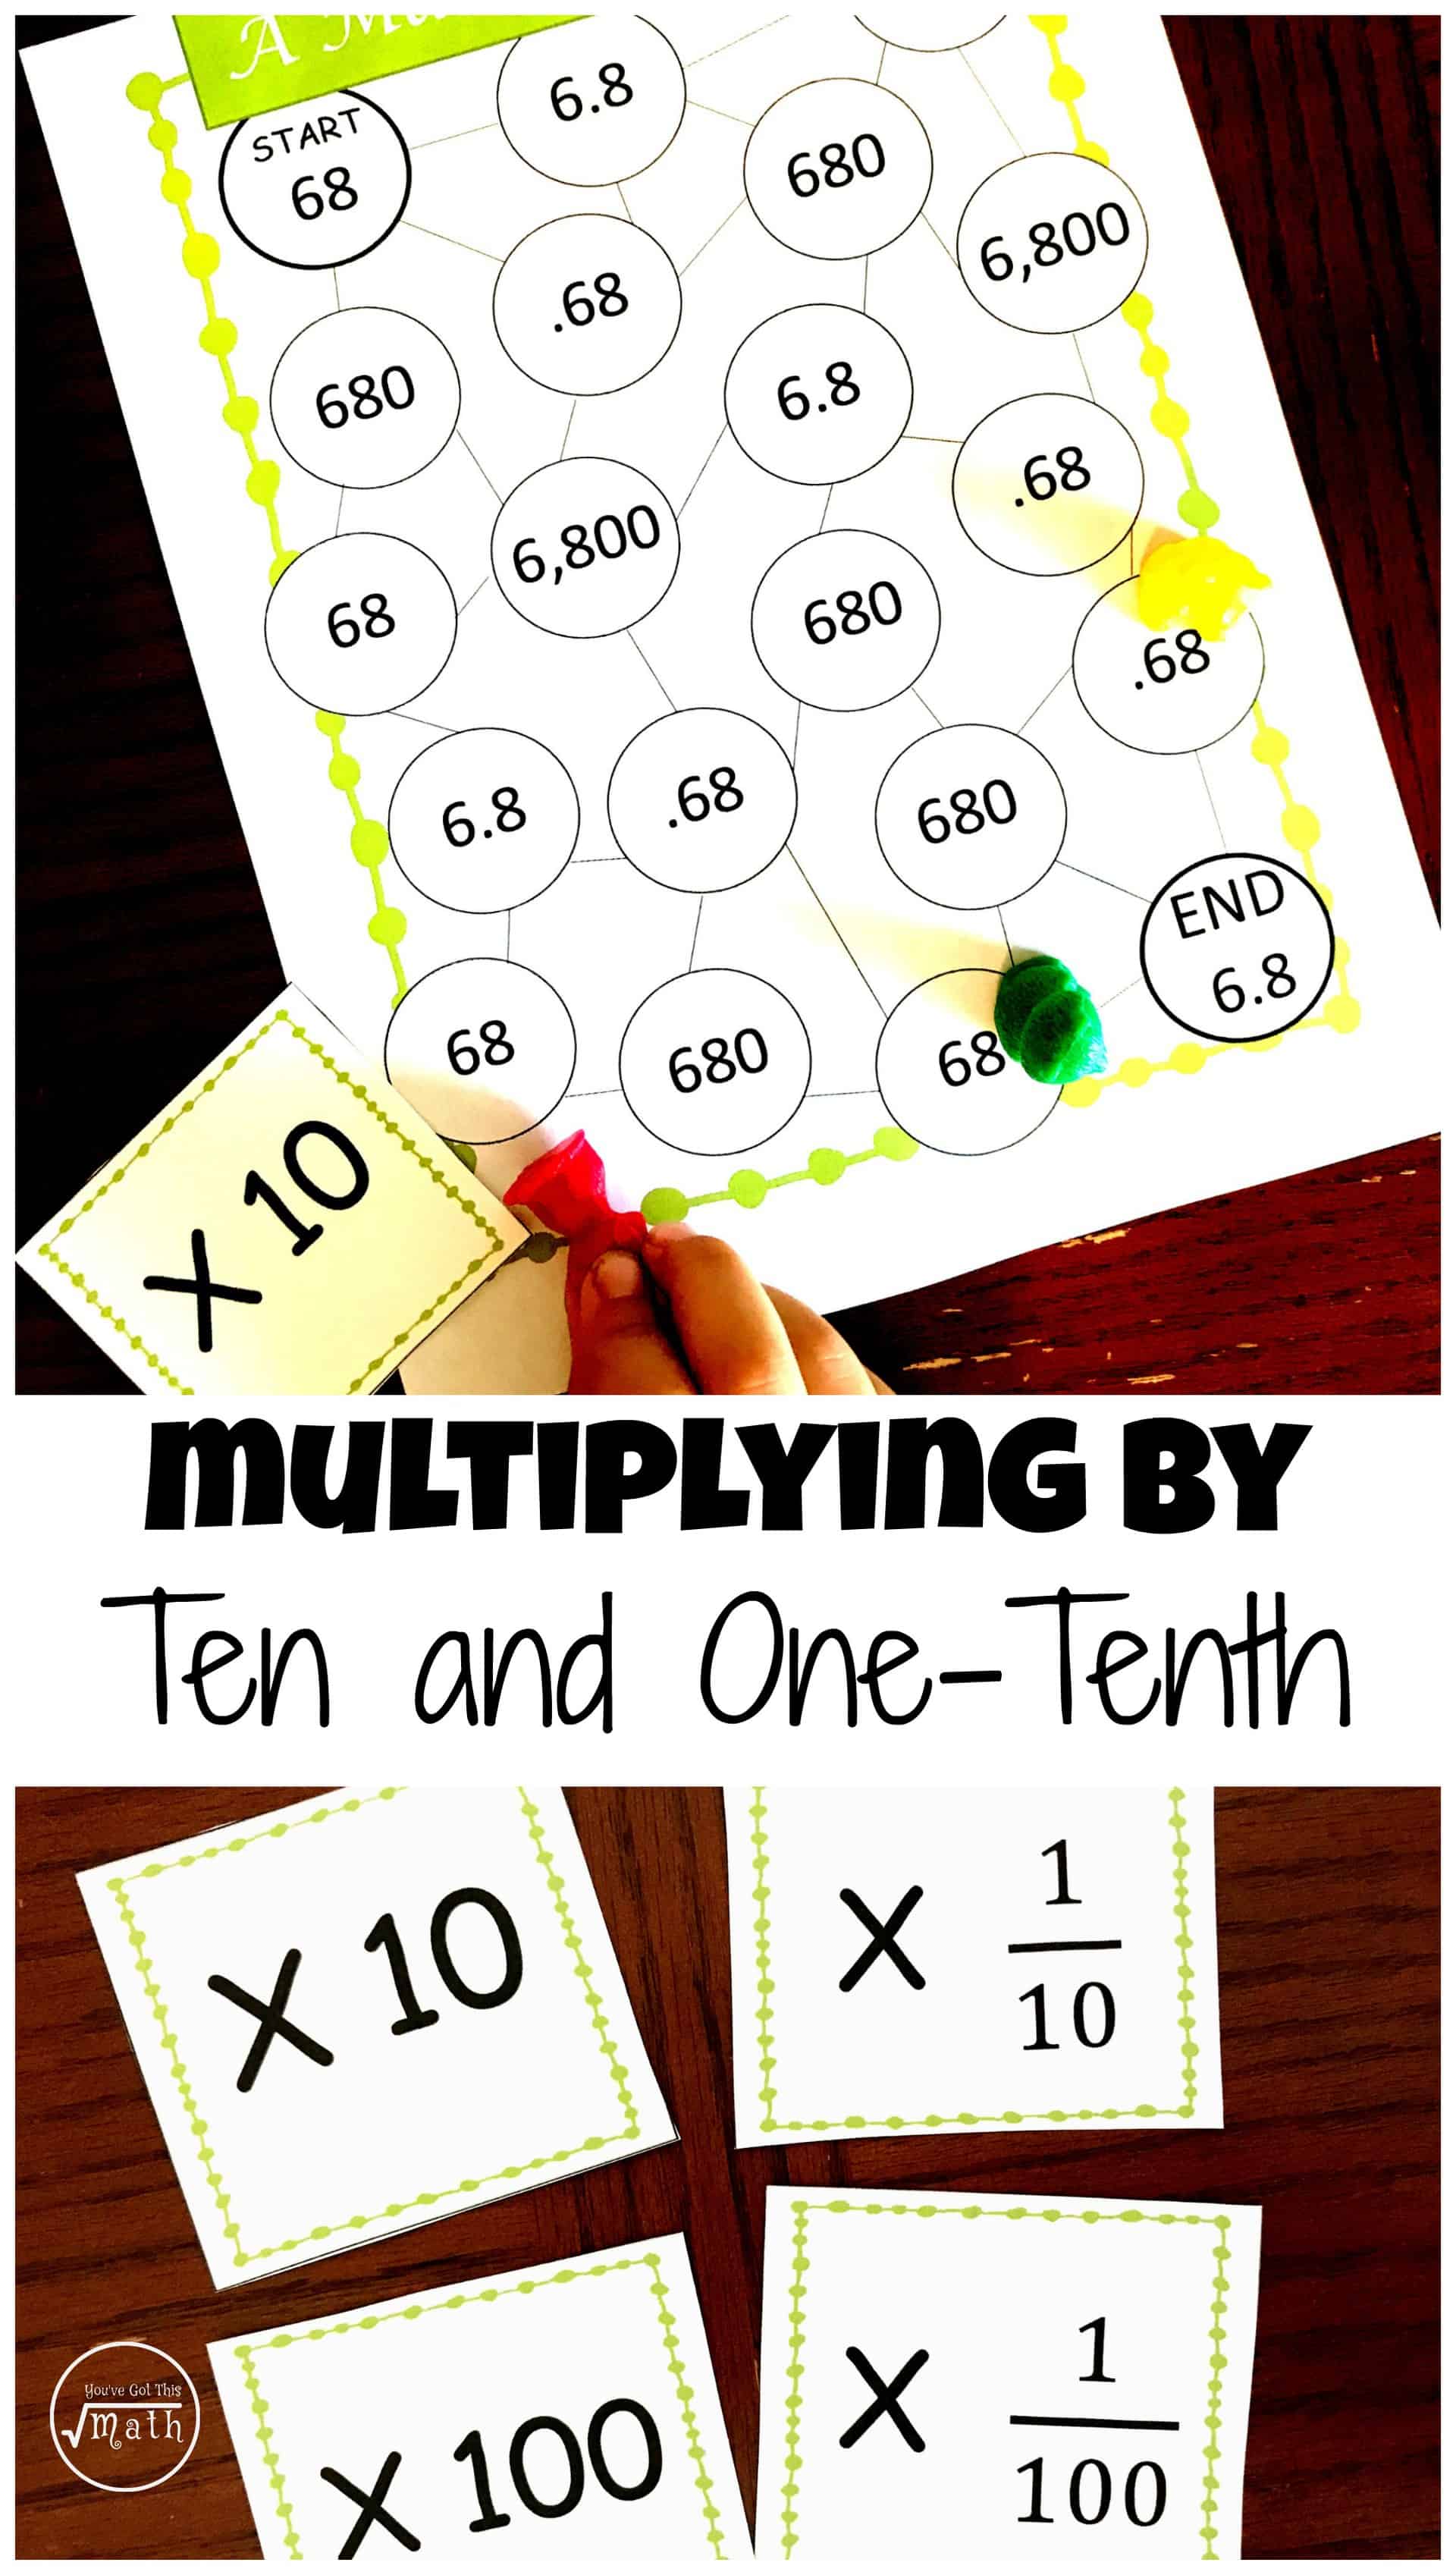 Multiplying by powers of 10 game being played on a table with paper tiles of math questions. 